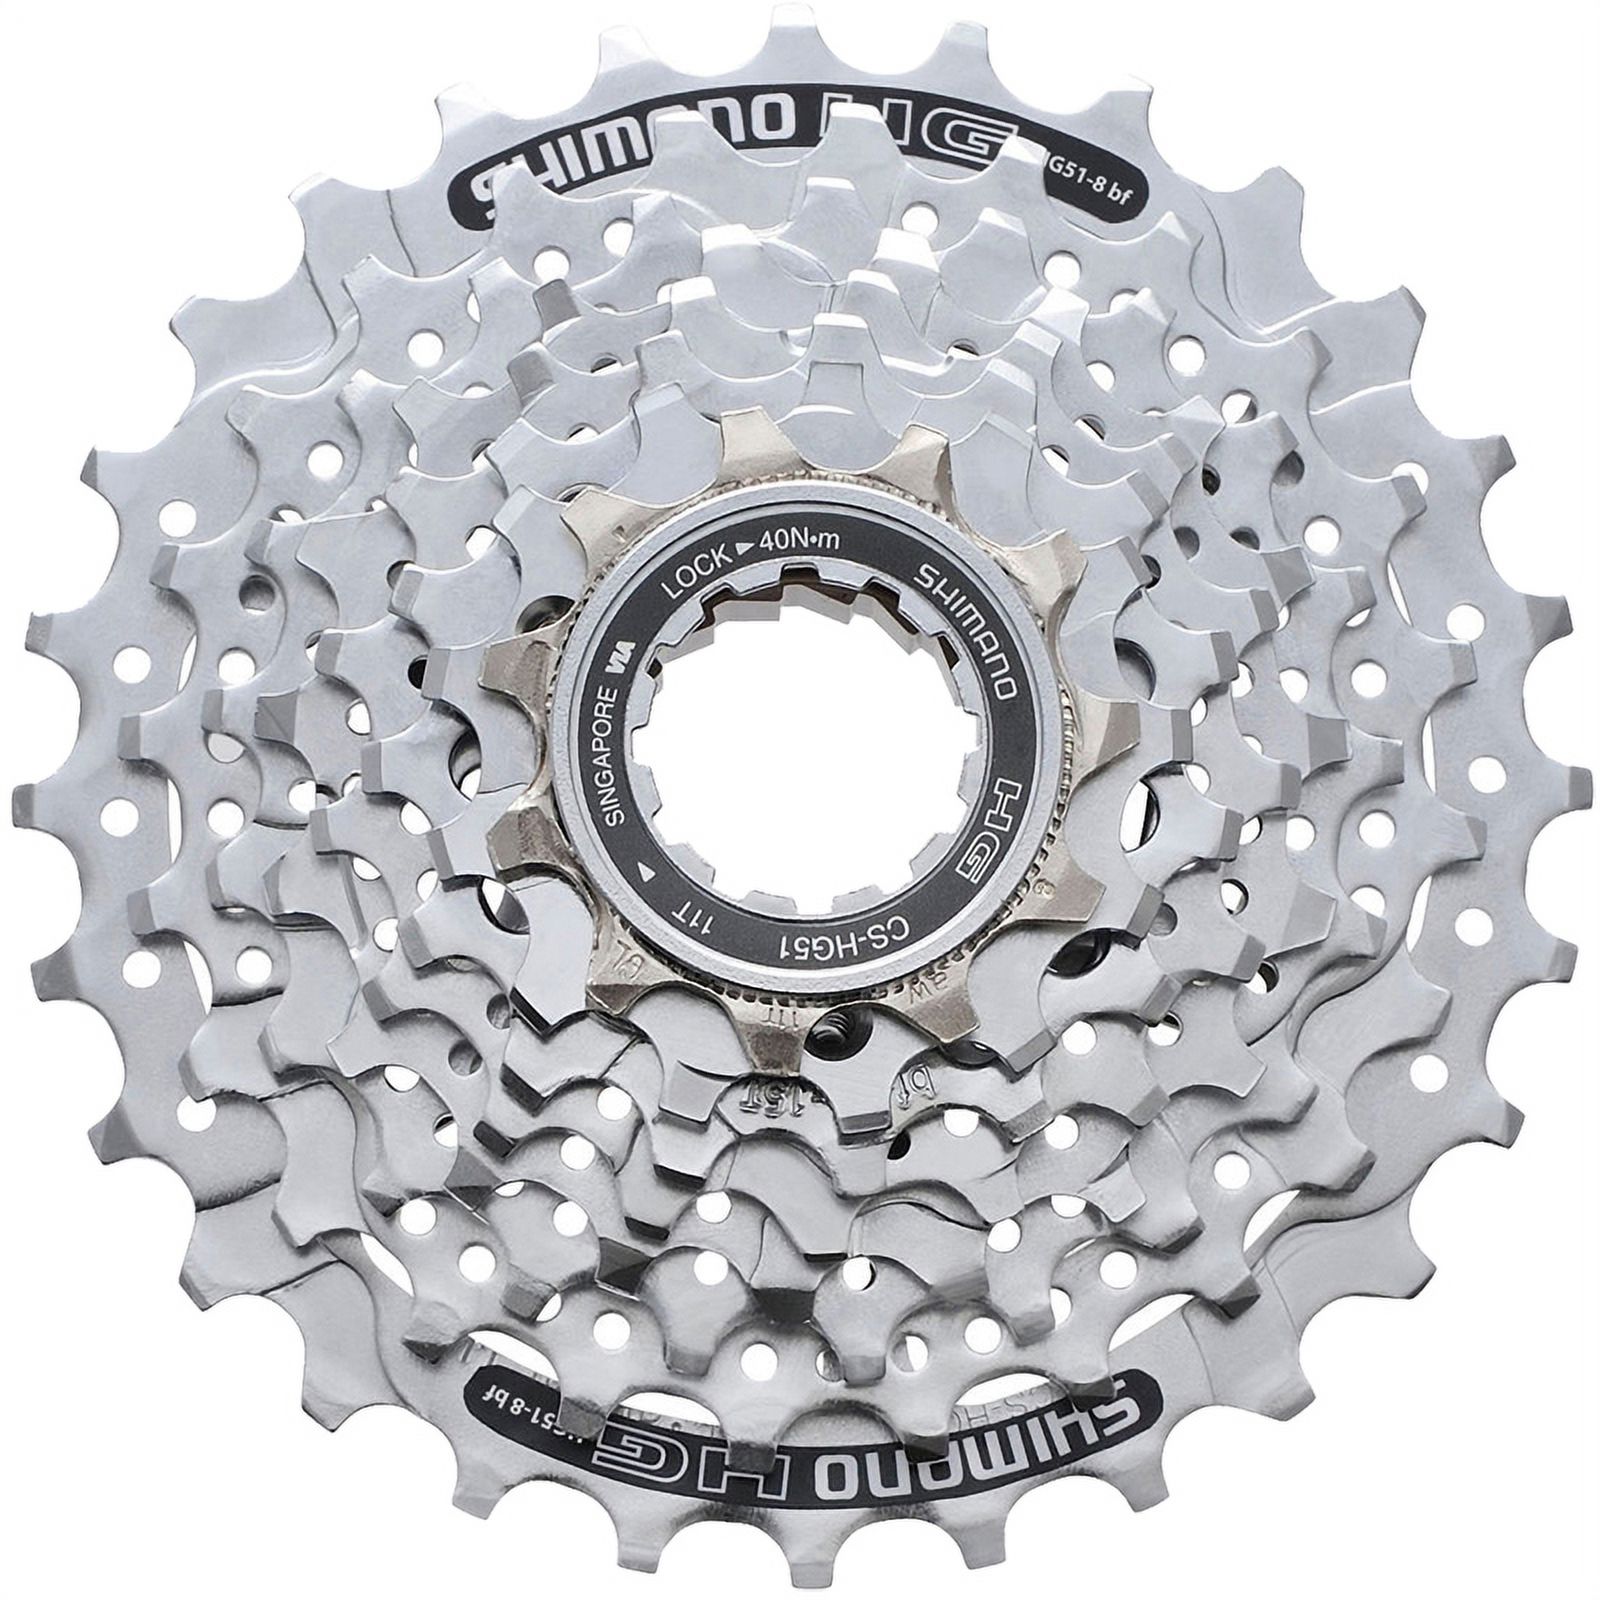 Shimano CASSETTE SPROCKET CS-HG50 8-S NI-PLATED 11-13-15-17-20-23-26-30T(AN) - image 2 of 3